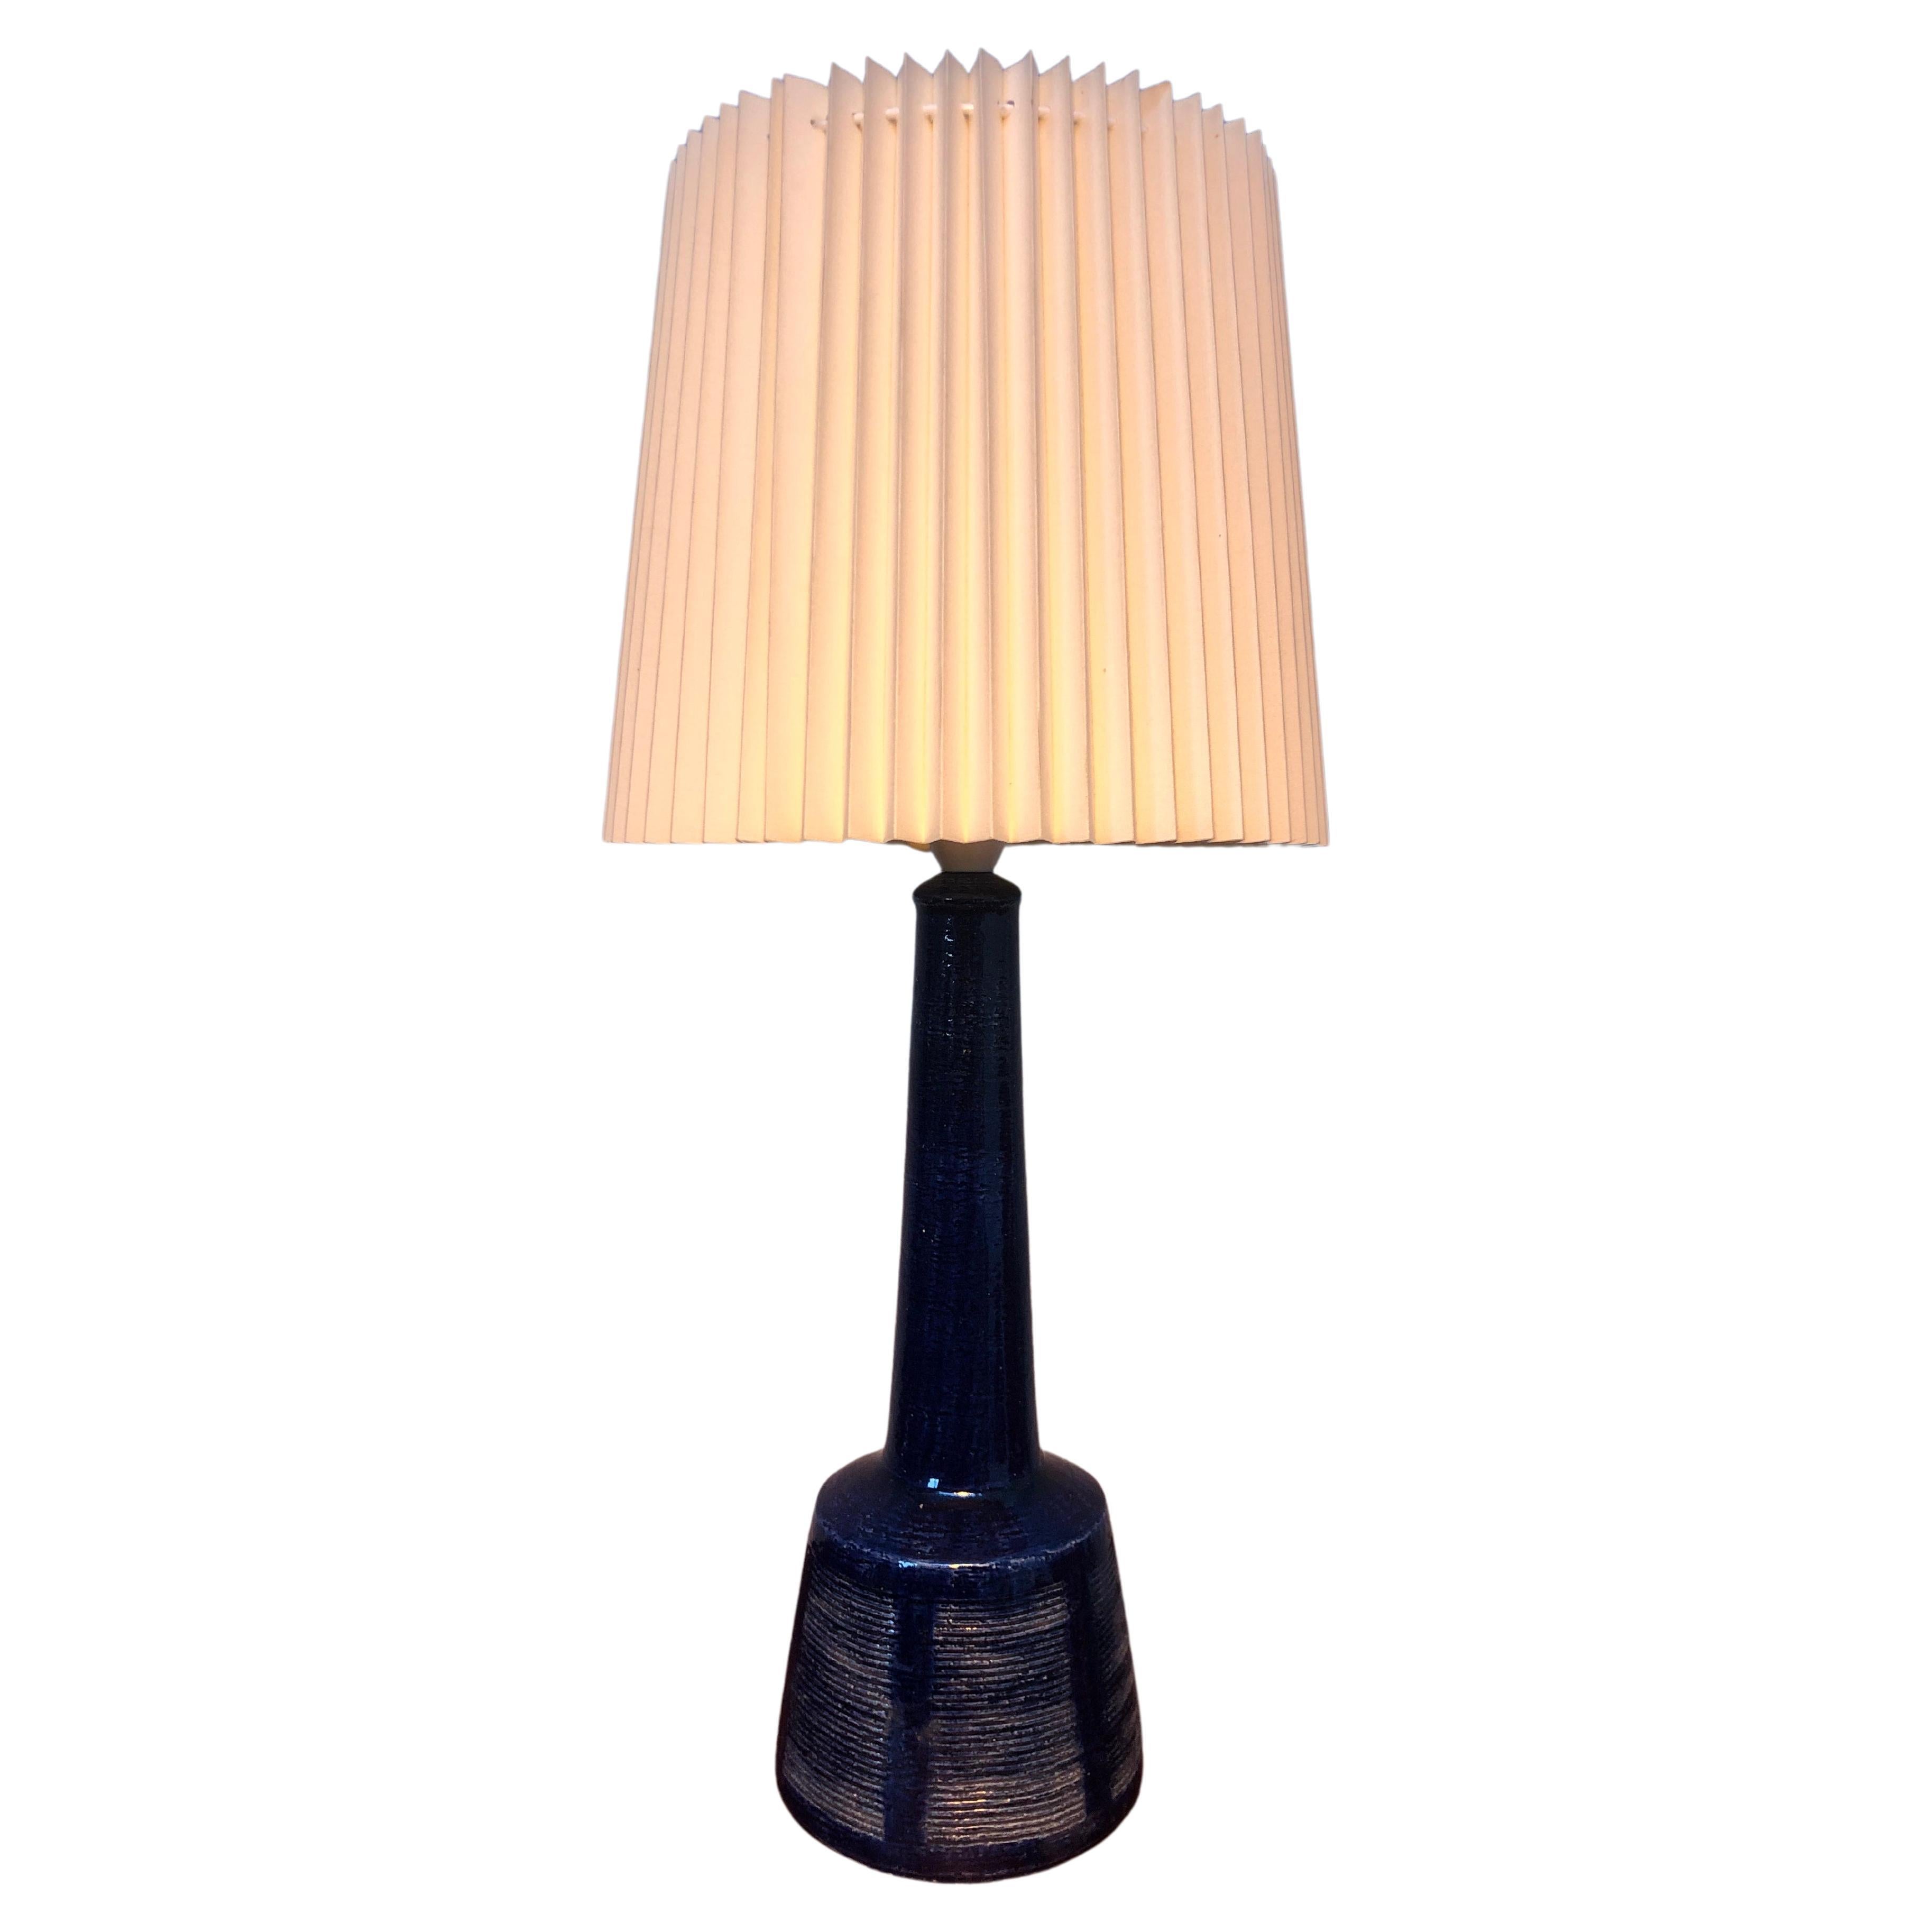 Vintage Pottery Table Lamp by Palshus for Le Klint of Denmark